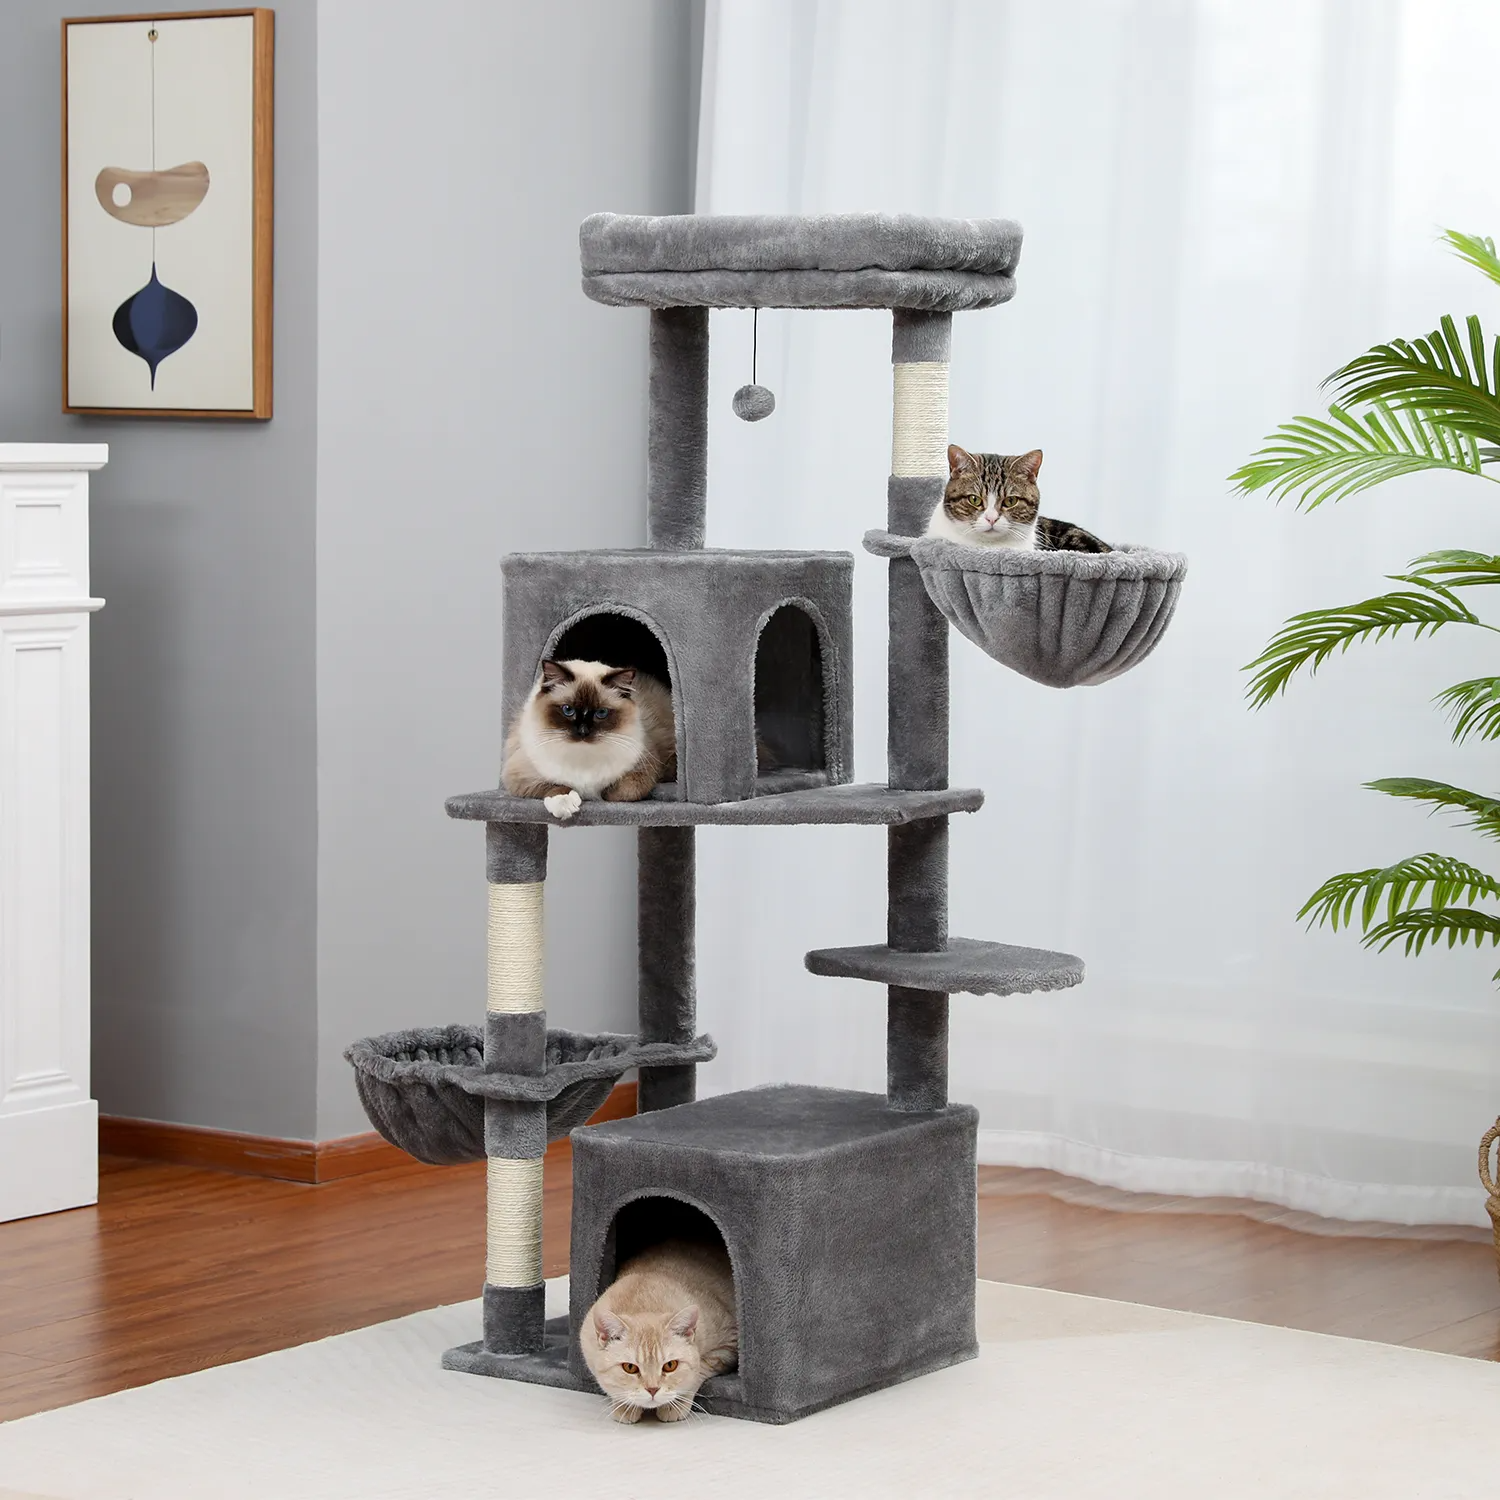 H138CM Luxury Cat Tree for Indoor Multi-Level Tower Double Condo Top Large Perch Comfy Hummock Natural Sisal Scratching Post Toy